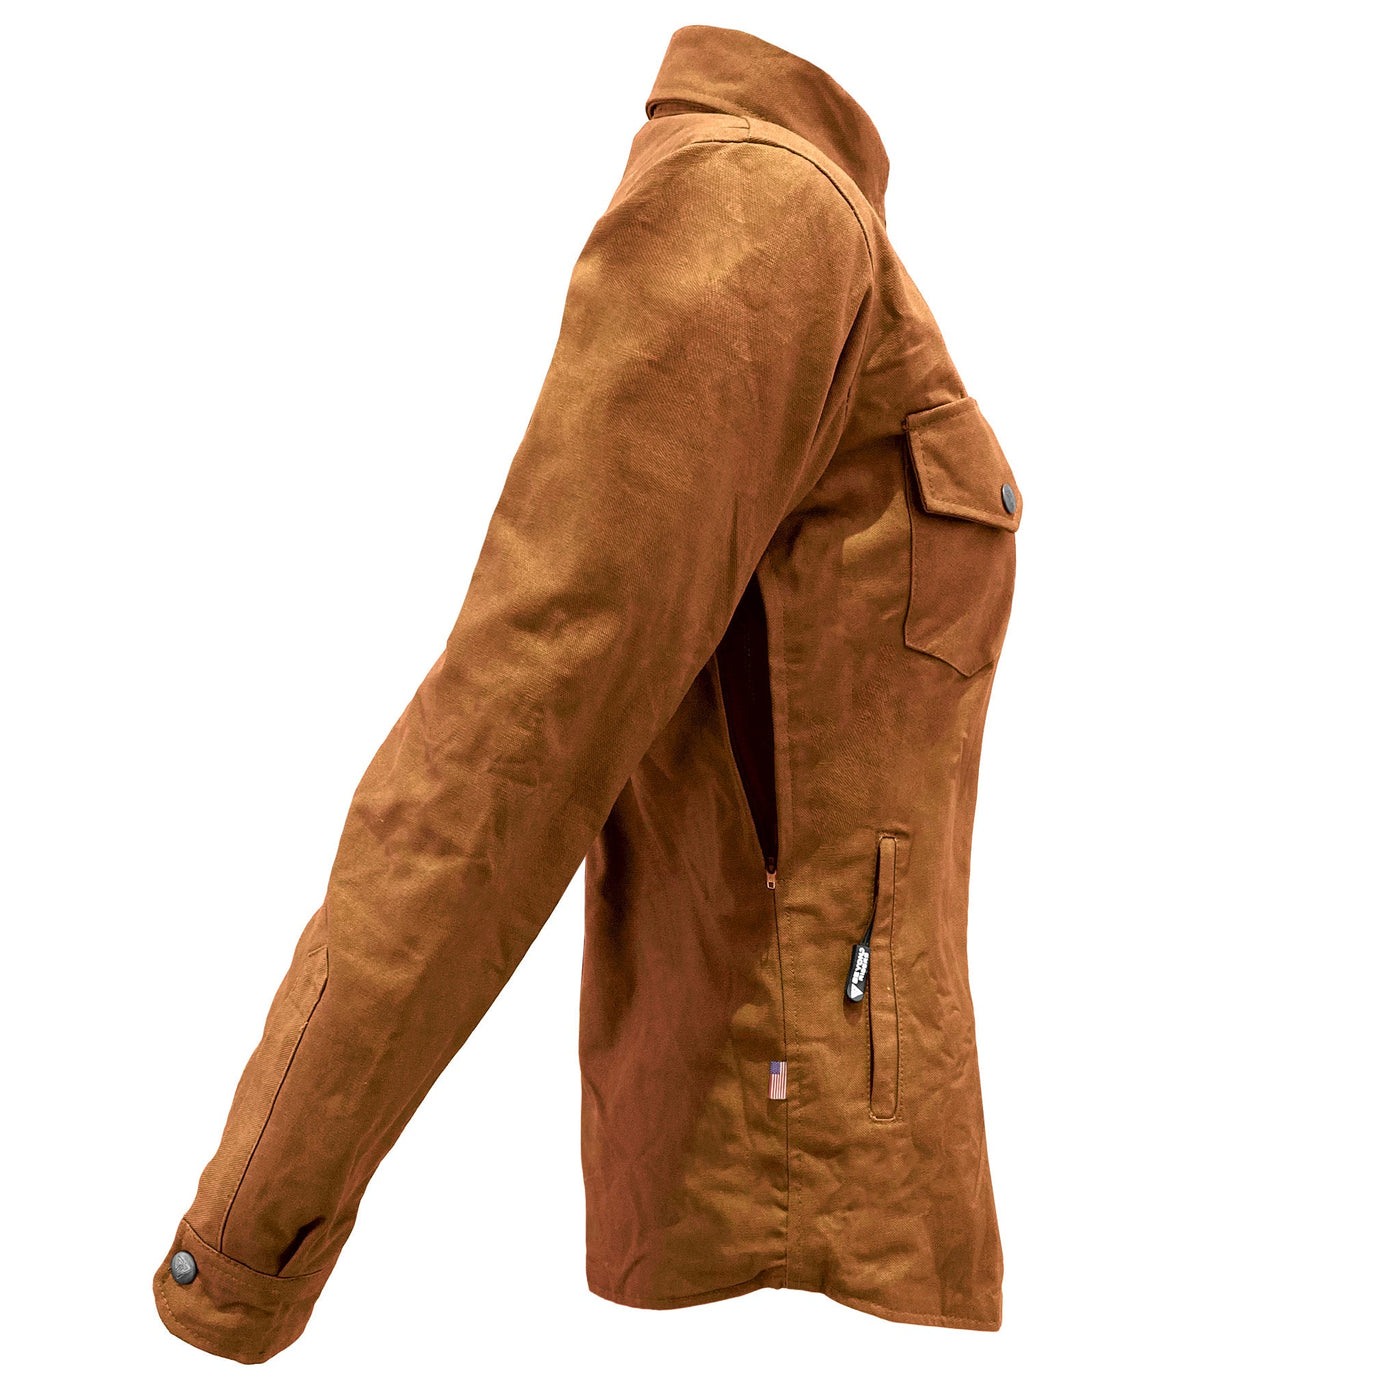 Protective Canvas Jacket with Pads for Women - Light Brown